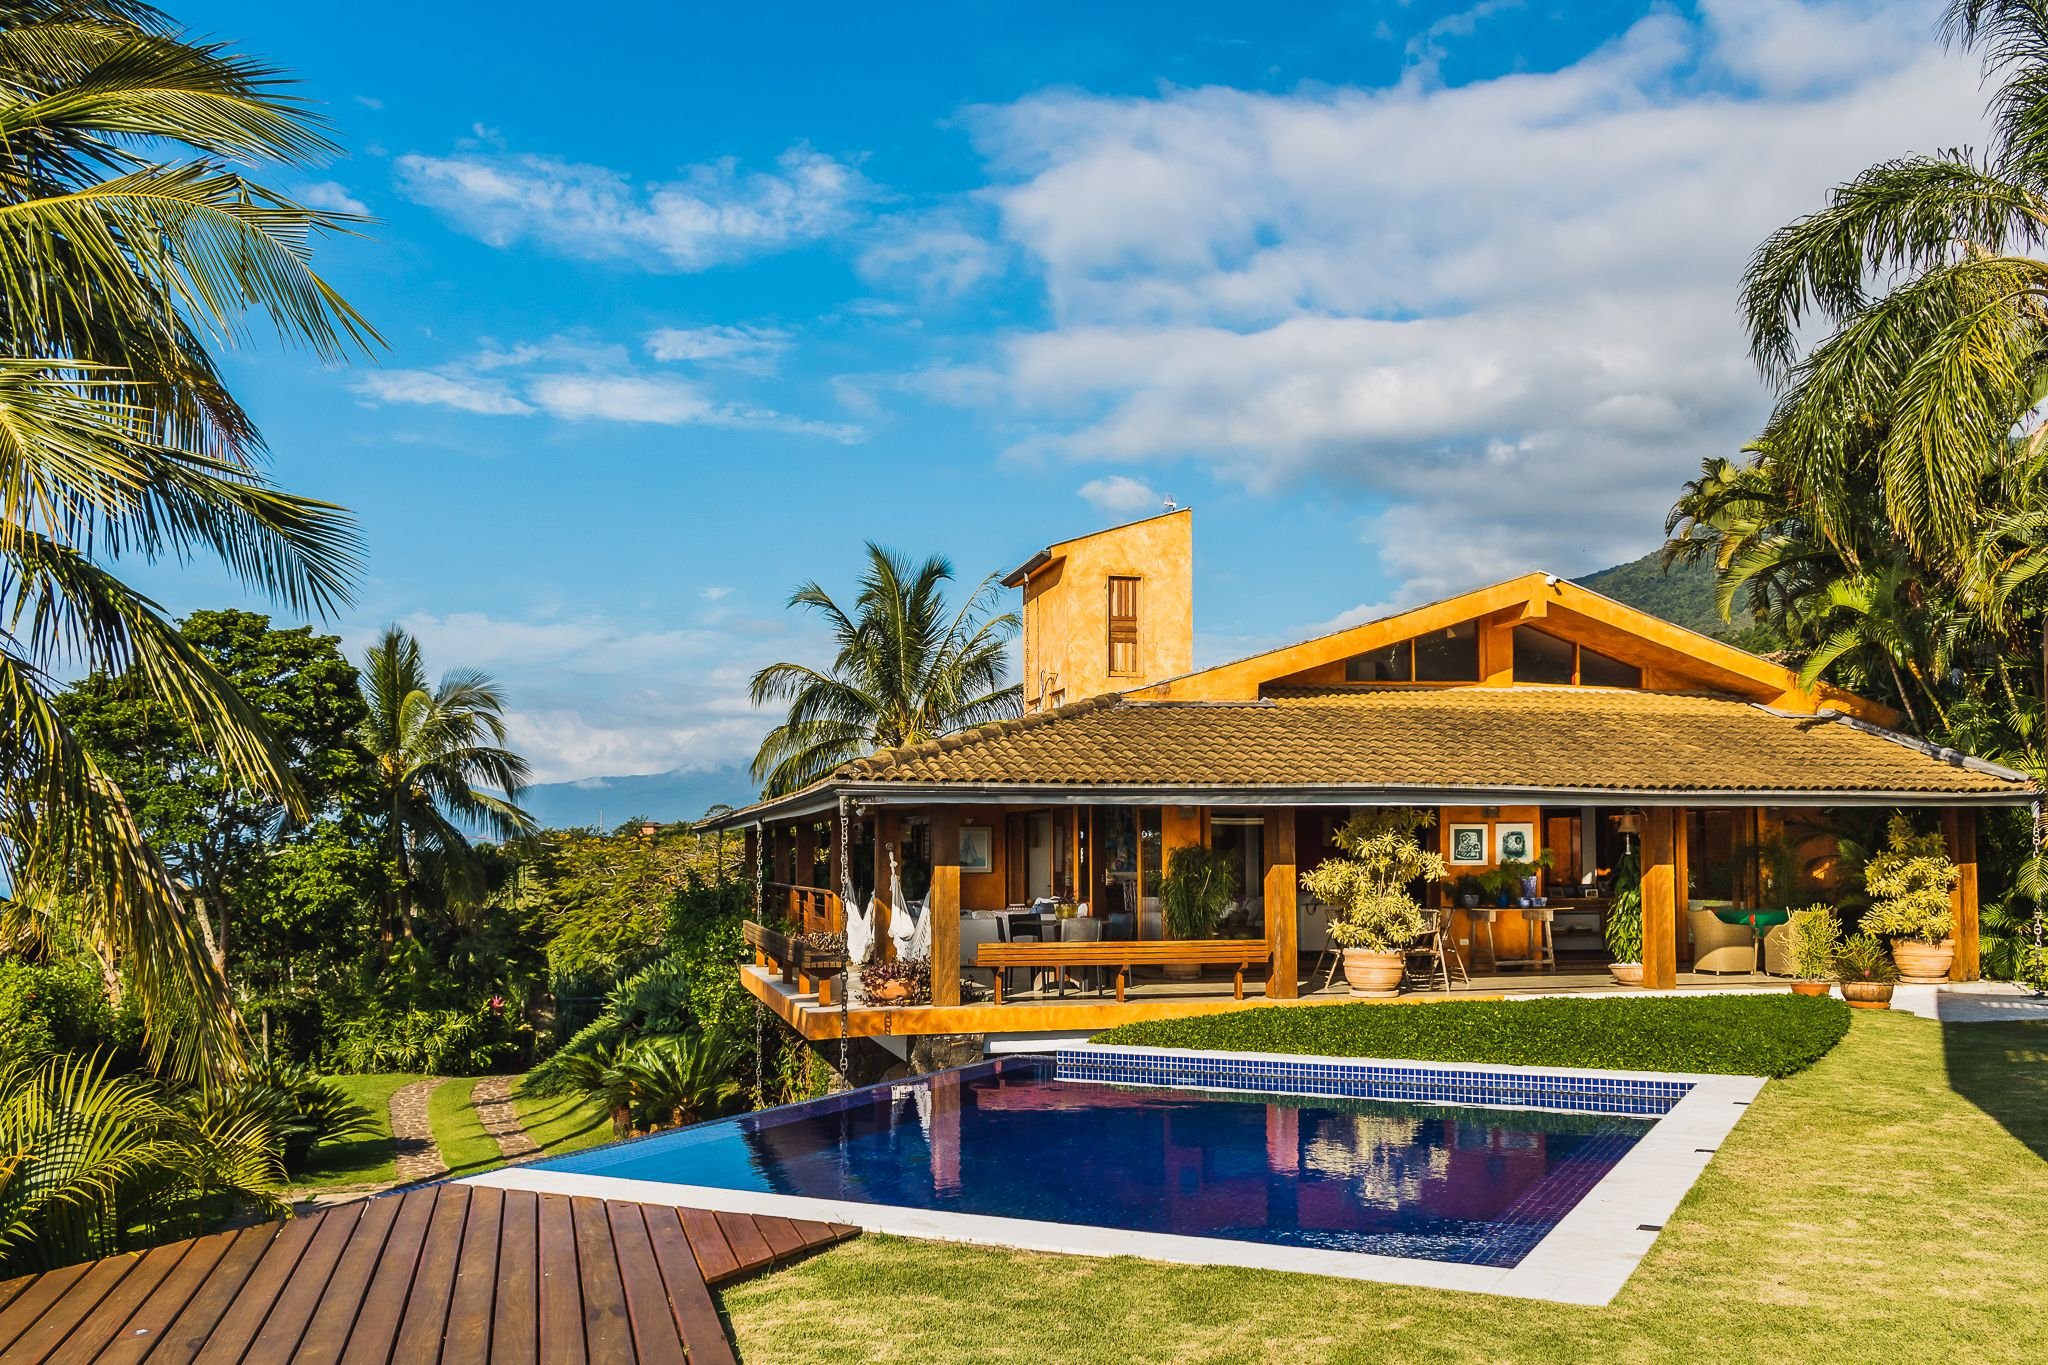 Property Image 2 - High standard house w/ panoramic views in Ilhabela